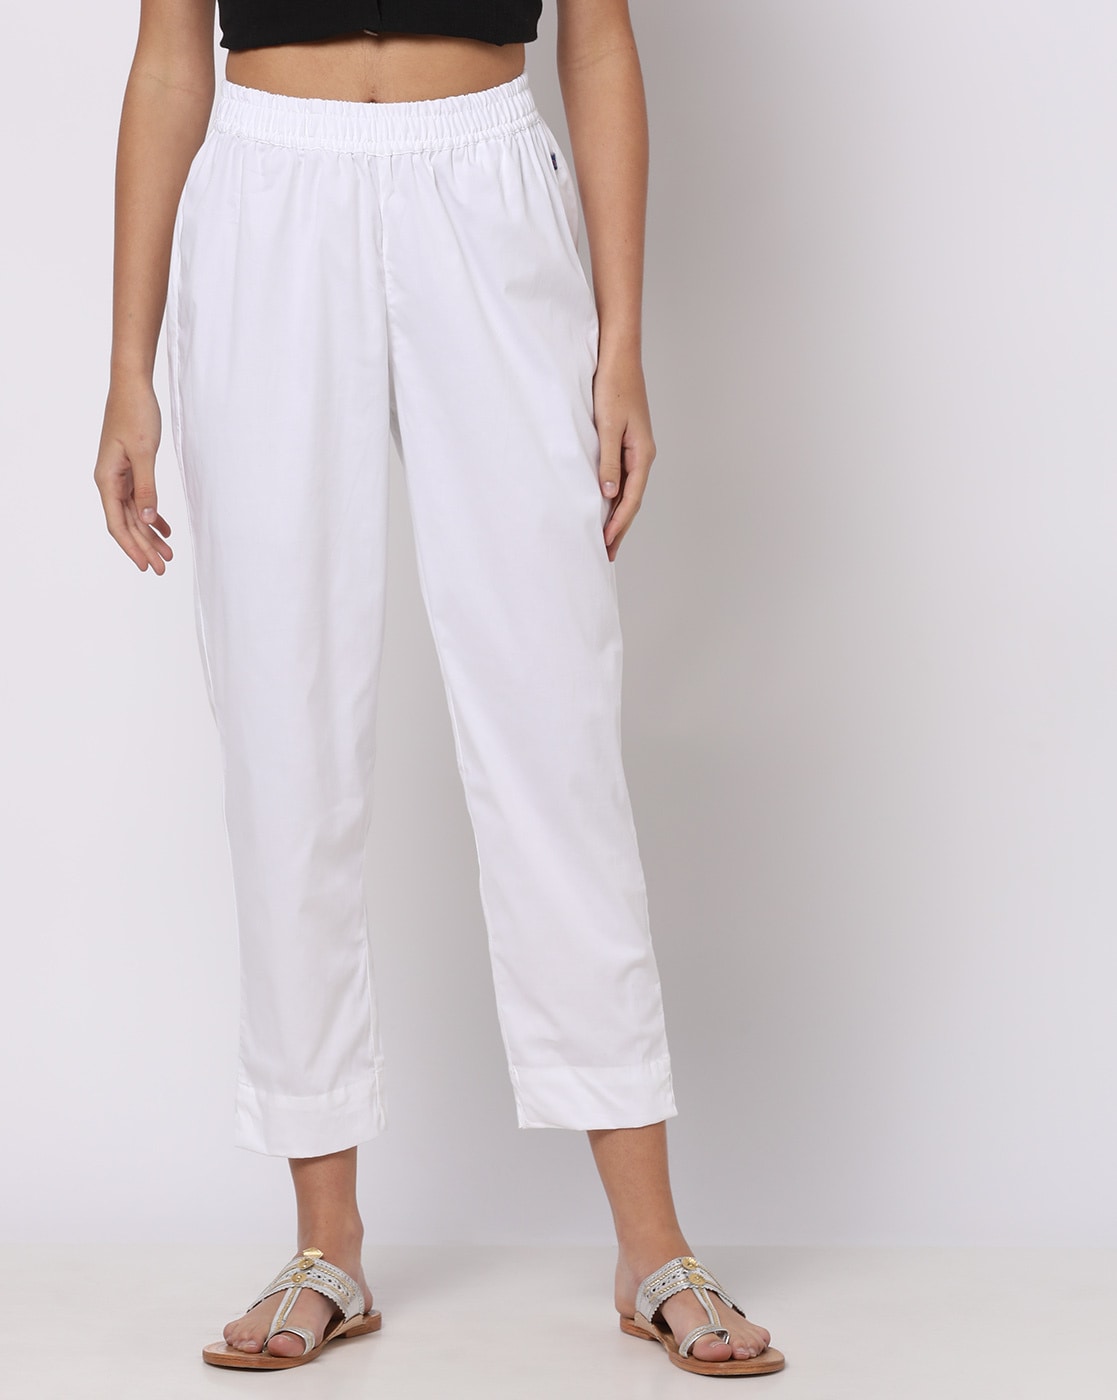 70s White Button Fly High Waisted Pants - Small, 25.5